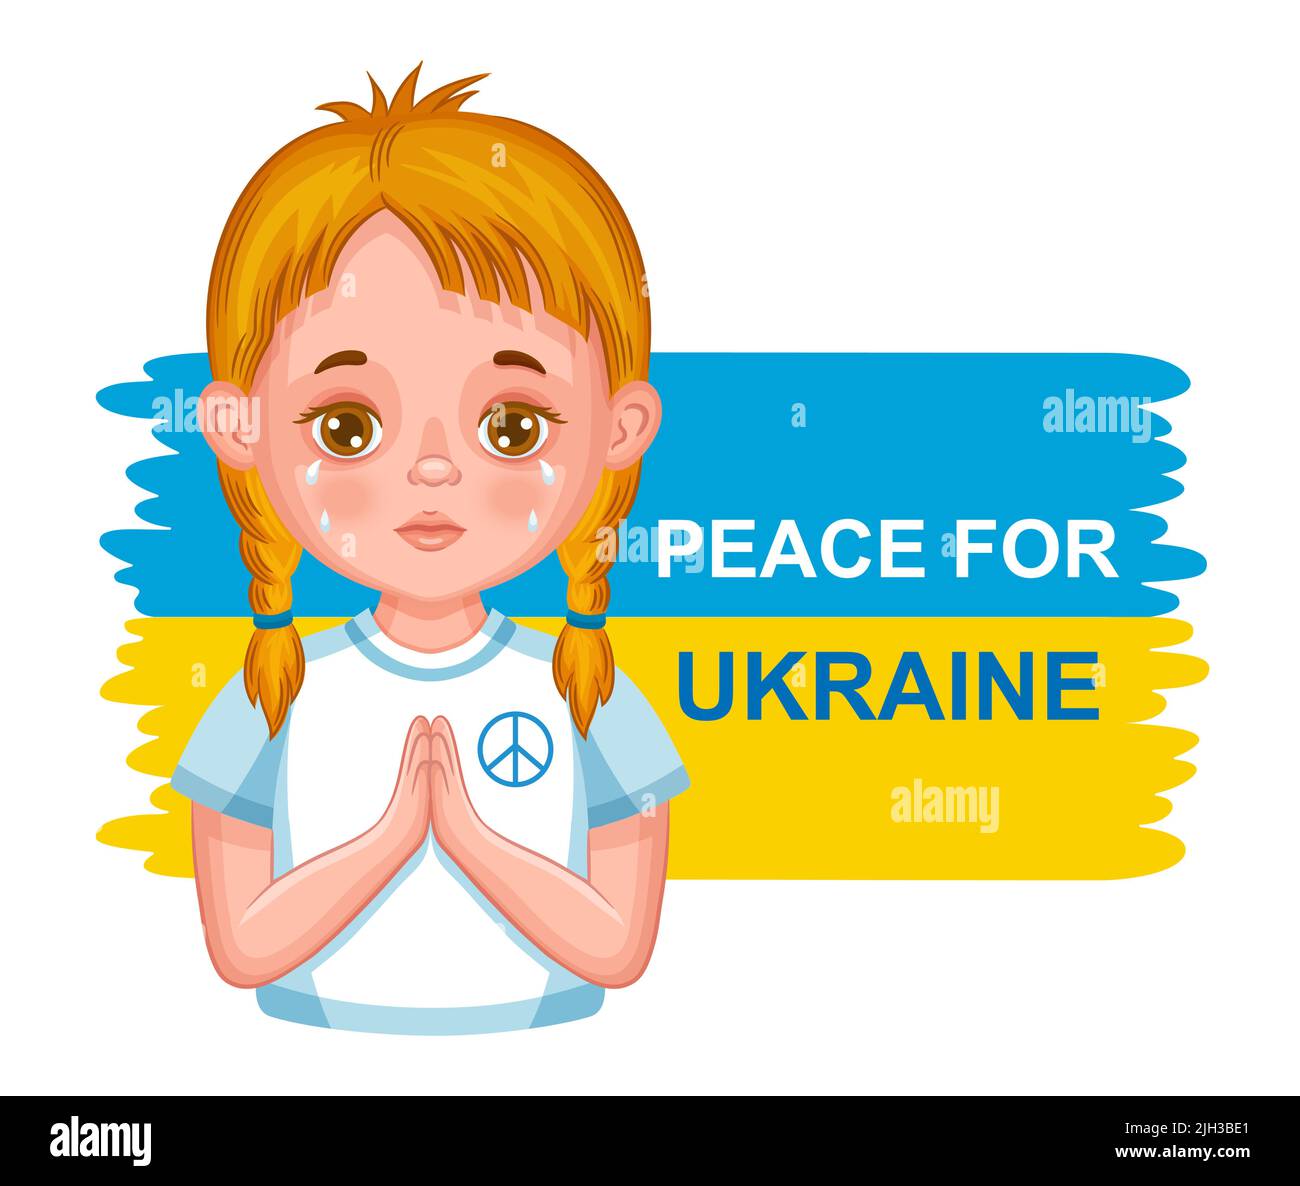 Pray for peace, stop war, save Ukraine. Ukrainian girl child cry. Help protecting from Russia terror military aggression. Prayer, national flag vector Stock Vector